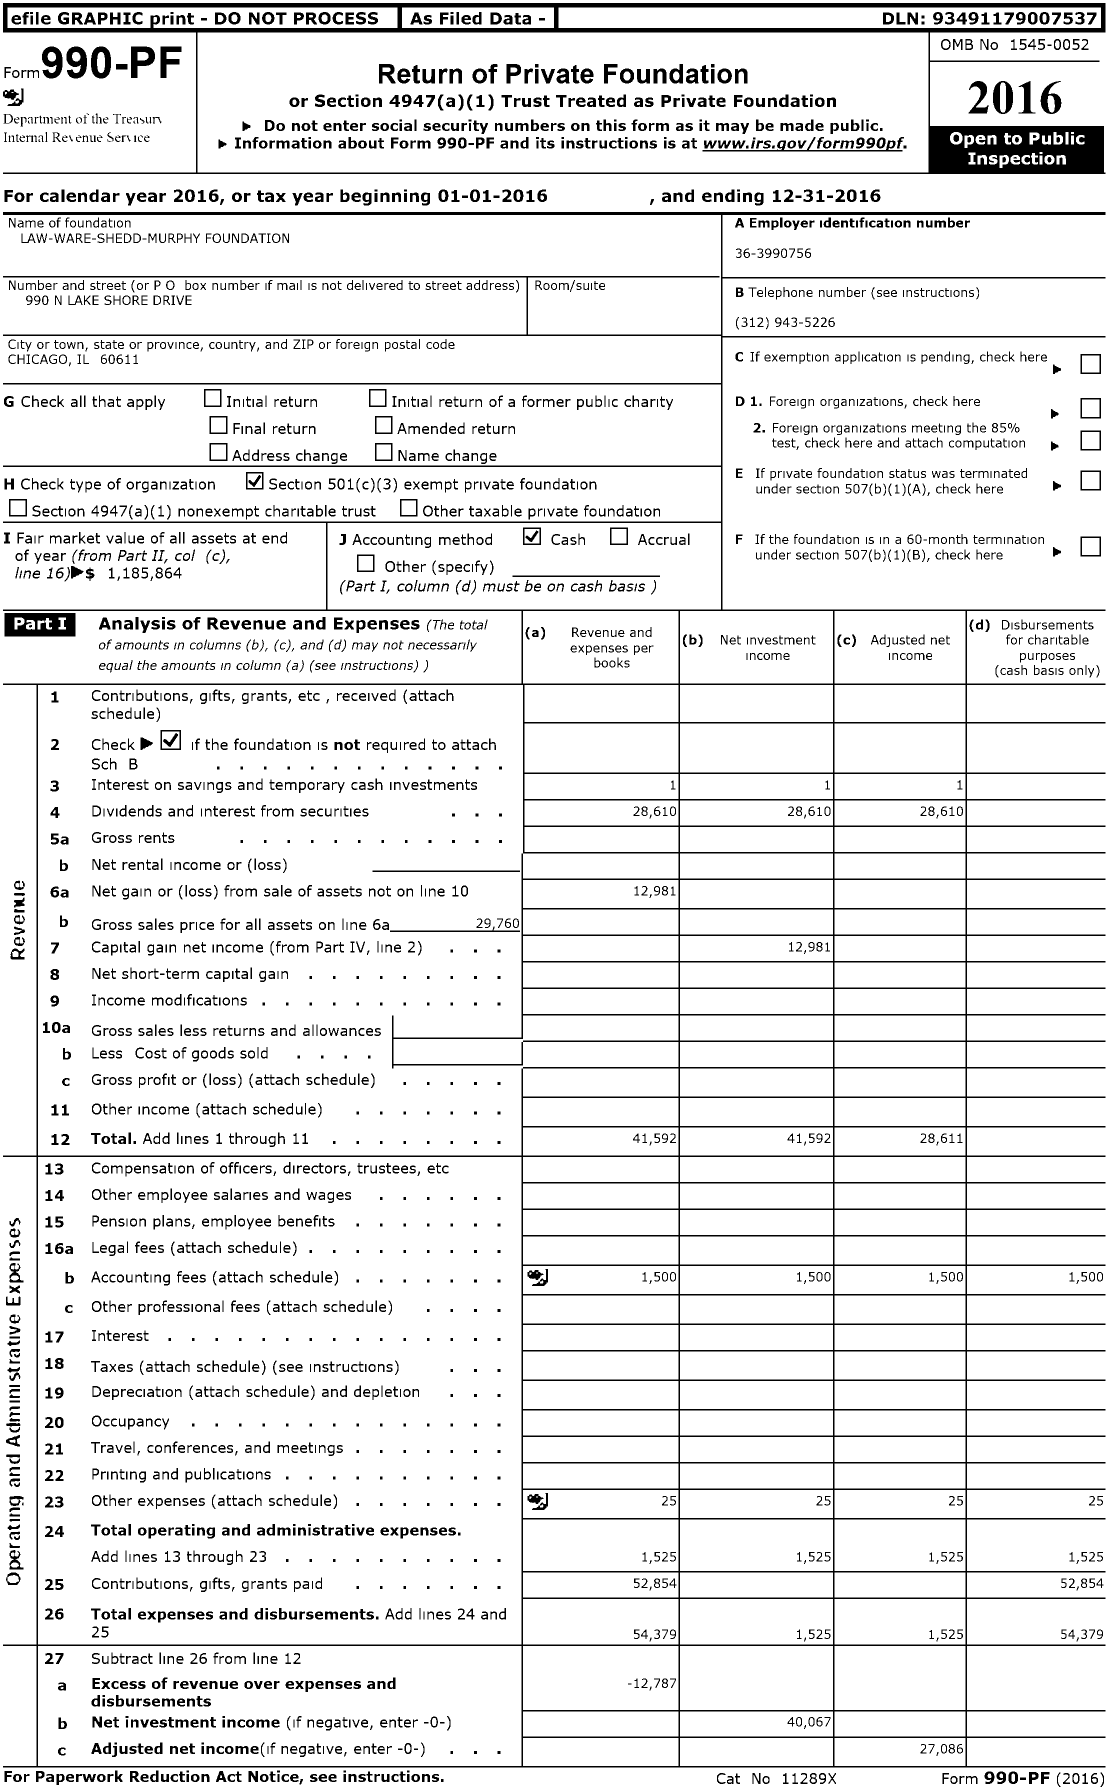 Image of first page of 2016 Form 990PF for Law-Ware-Shedd-Murphy Foundation